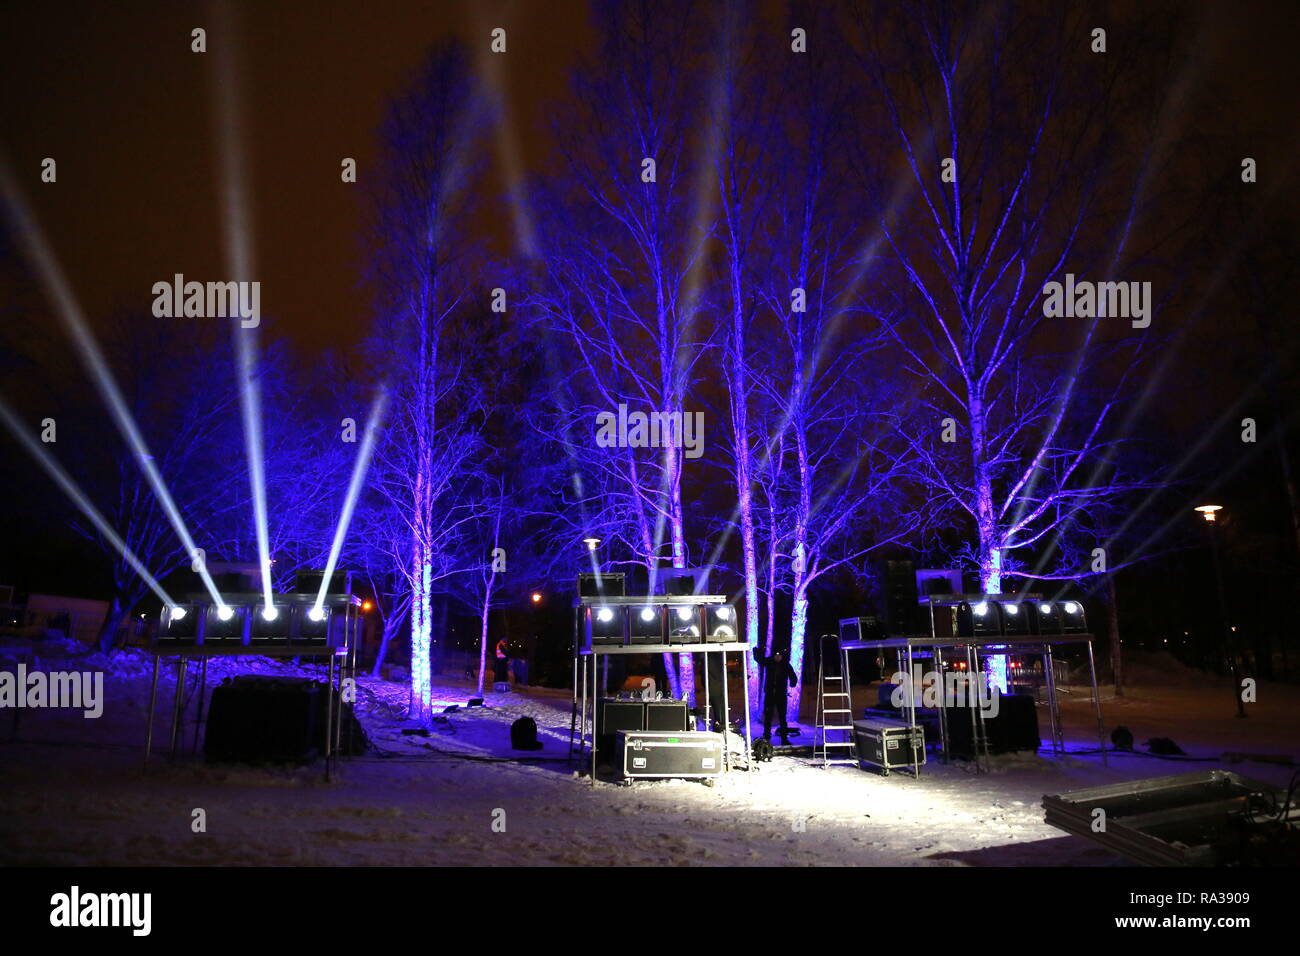 (190101) --ESPOO, Jan. 1, 2019 (Xinhua) -- A staff member packs up the equipment after a massive laser show held to celebrate the New Year in the city of Espoo, Finland, on Dec. 31, 2018. Espoo becomes the first city in Finland to replace fireworks with laser show when celebrating the New Year. The public demand for banning the use of fireworks is constantly rising in recent years in Finland, aiming to reduce the cases of injuries, air pollution and stress and anxiety in animals caused by fireworks. (Xinhua/Li Jizhi) Stock Photo